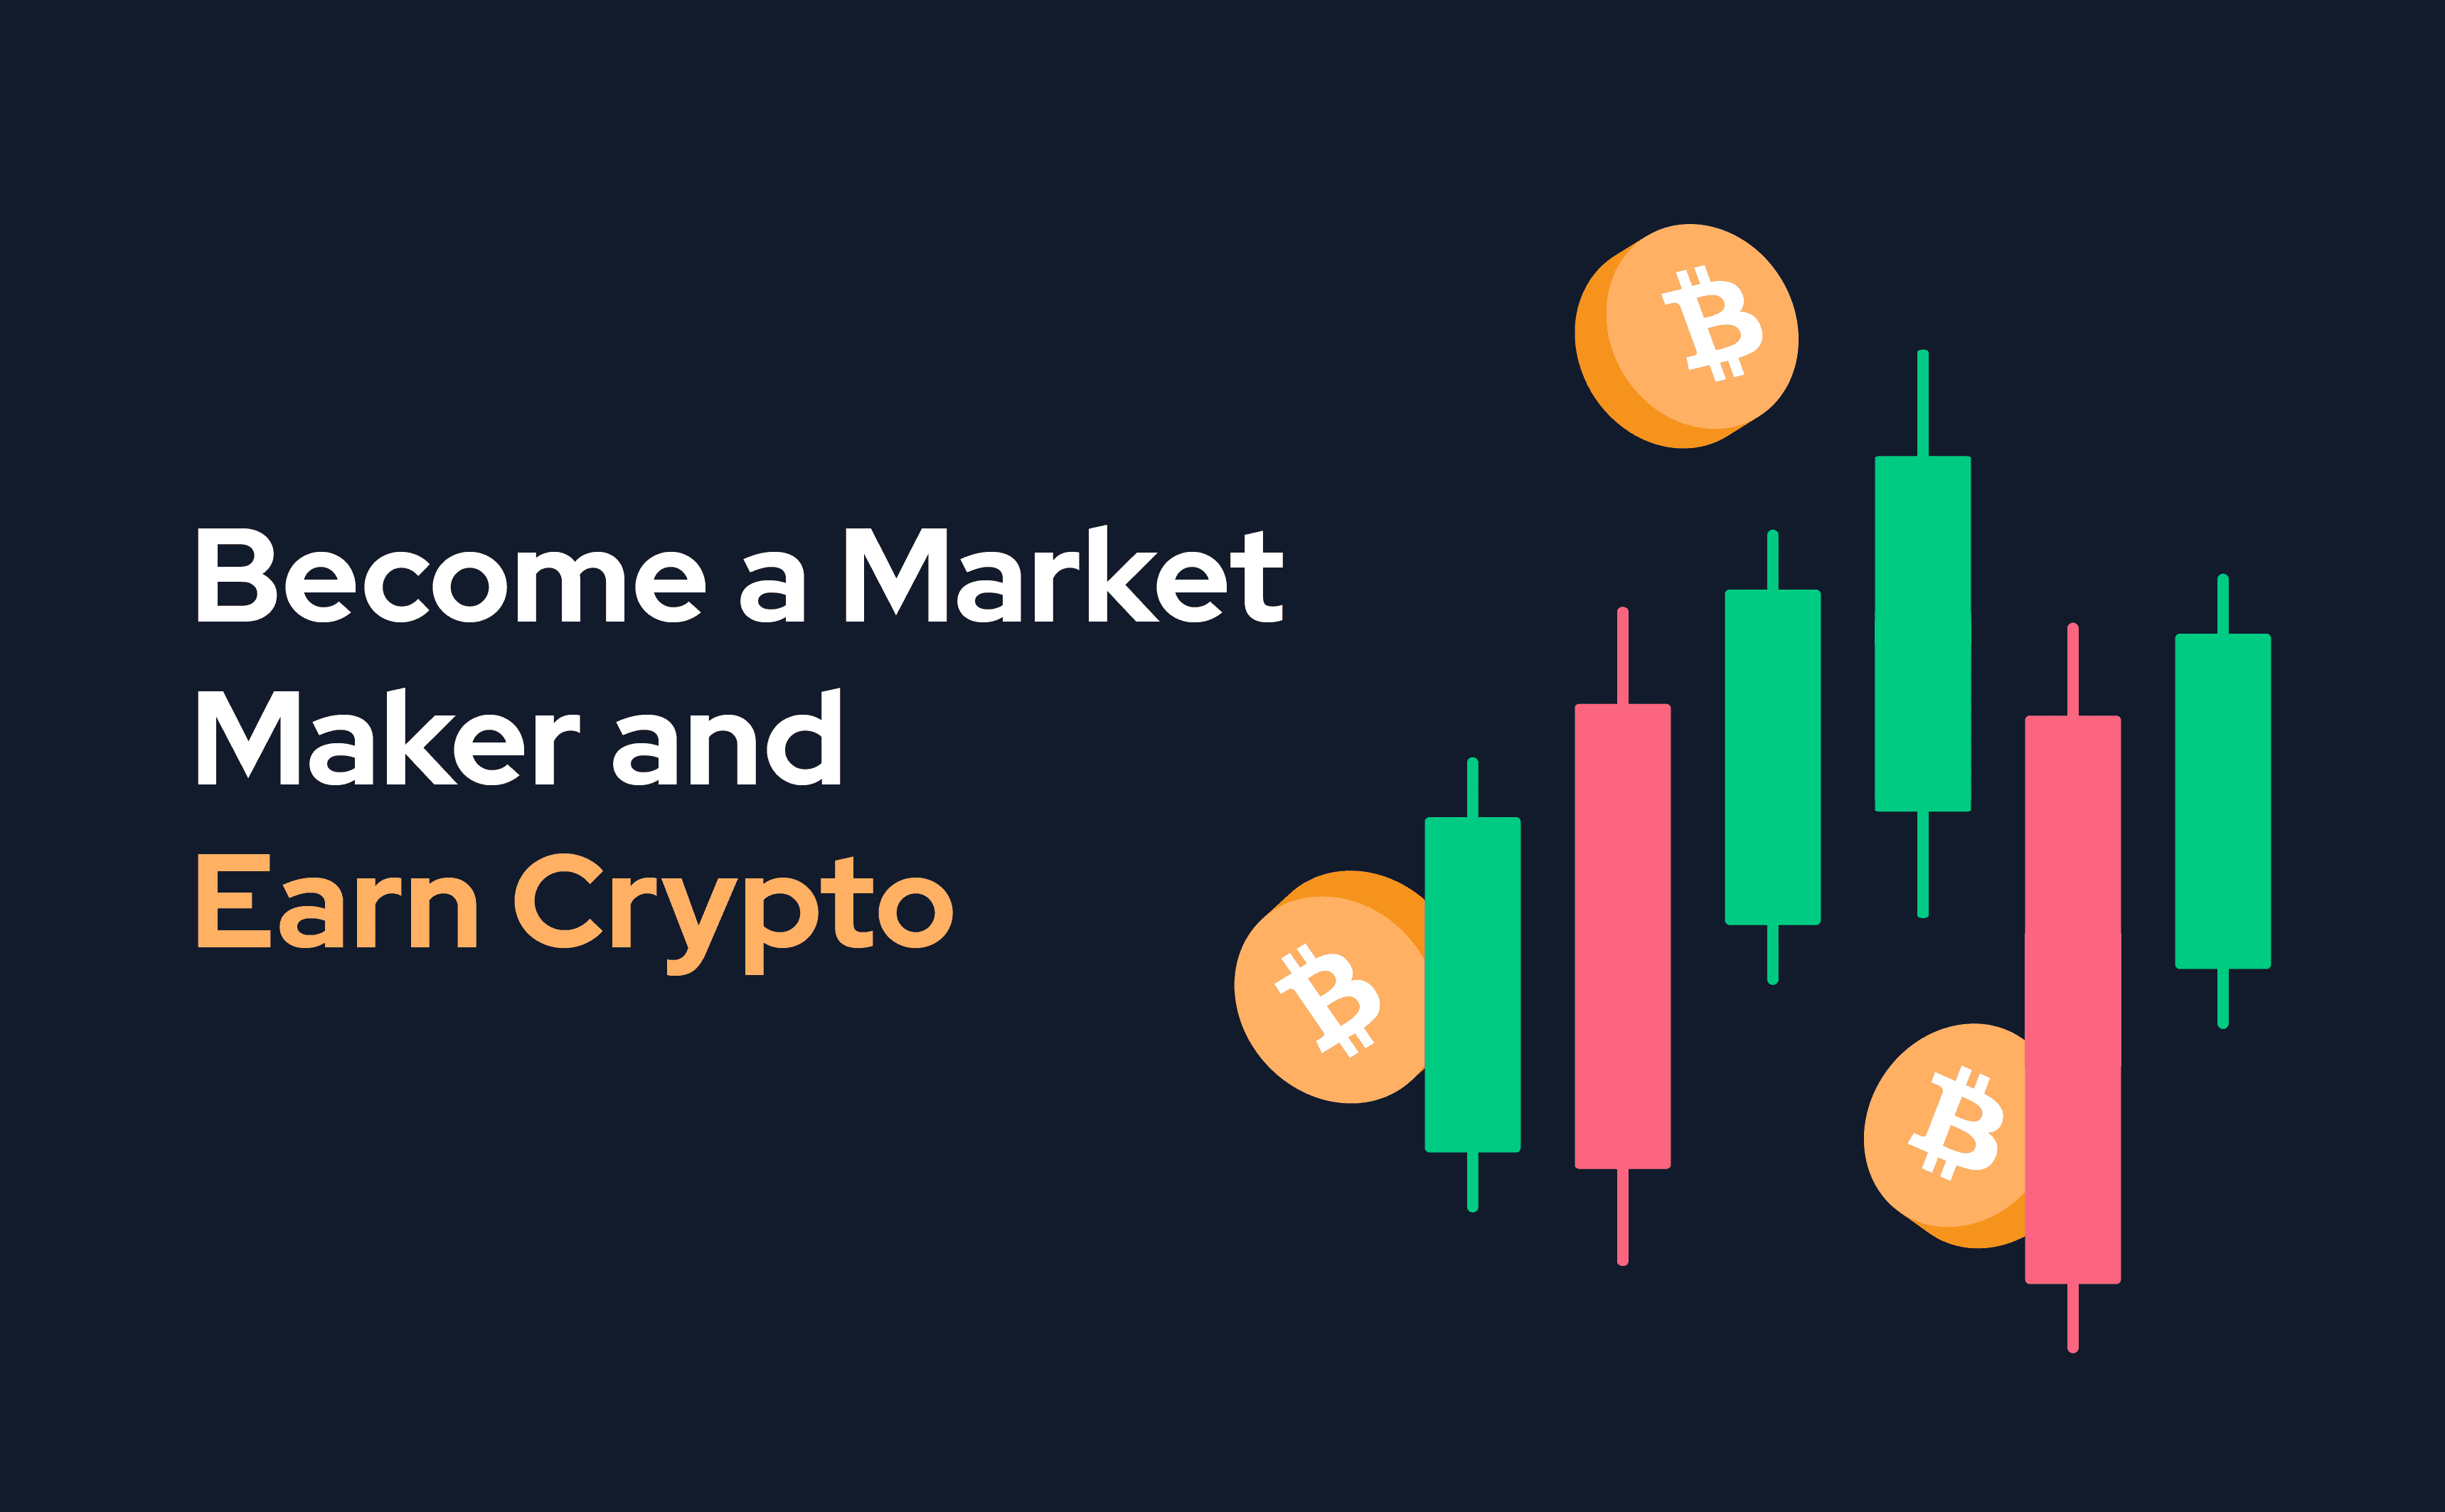 Market makers at SpectroCoin Exchange can earn crypto by making the market.